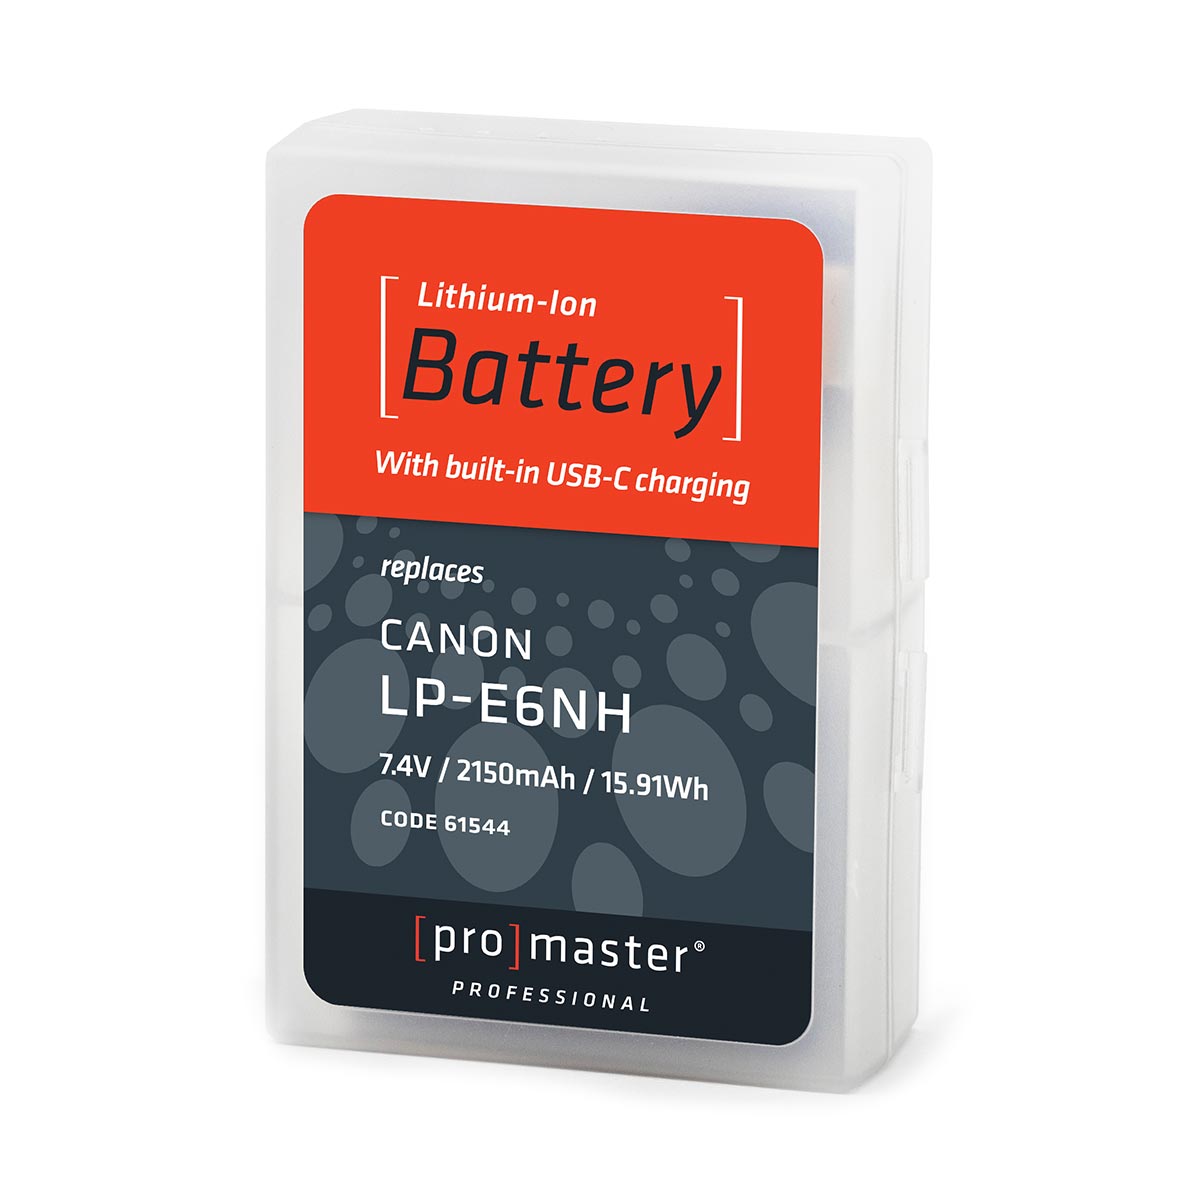 ProMaster LP-E6NH Li-ion Battery with USB-C Charging for Canon